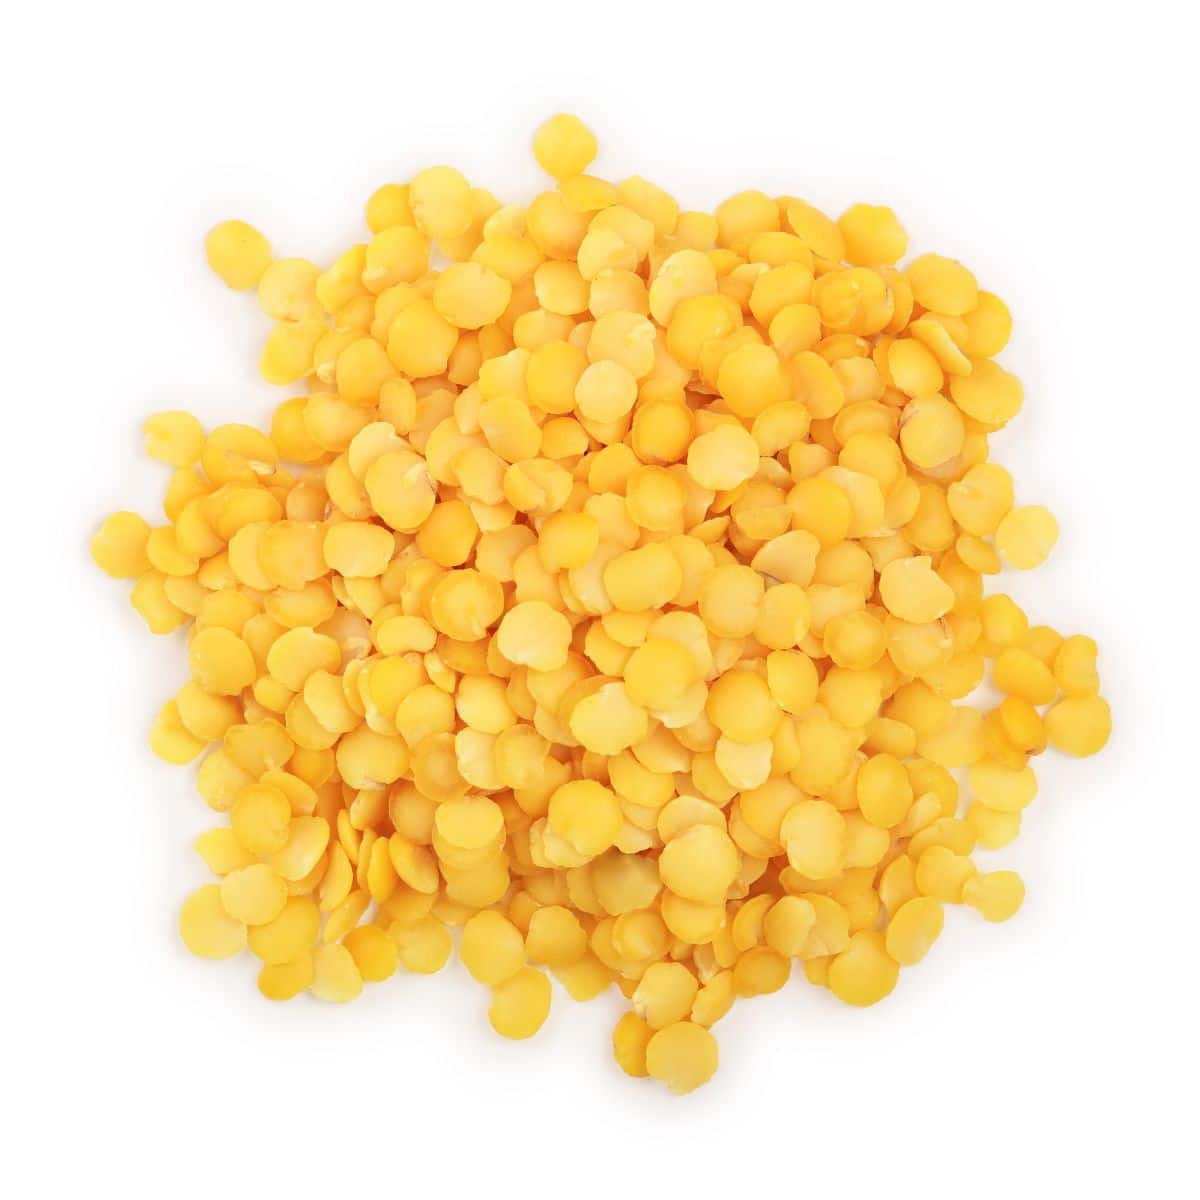 Yellow lentils on a white background.